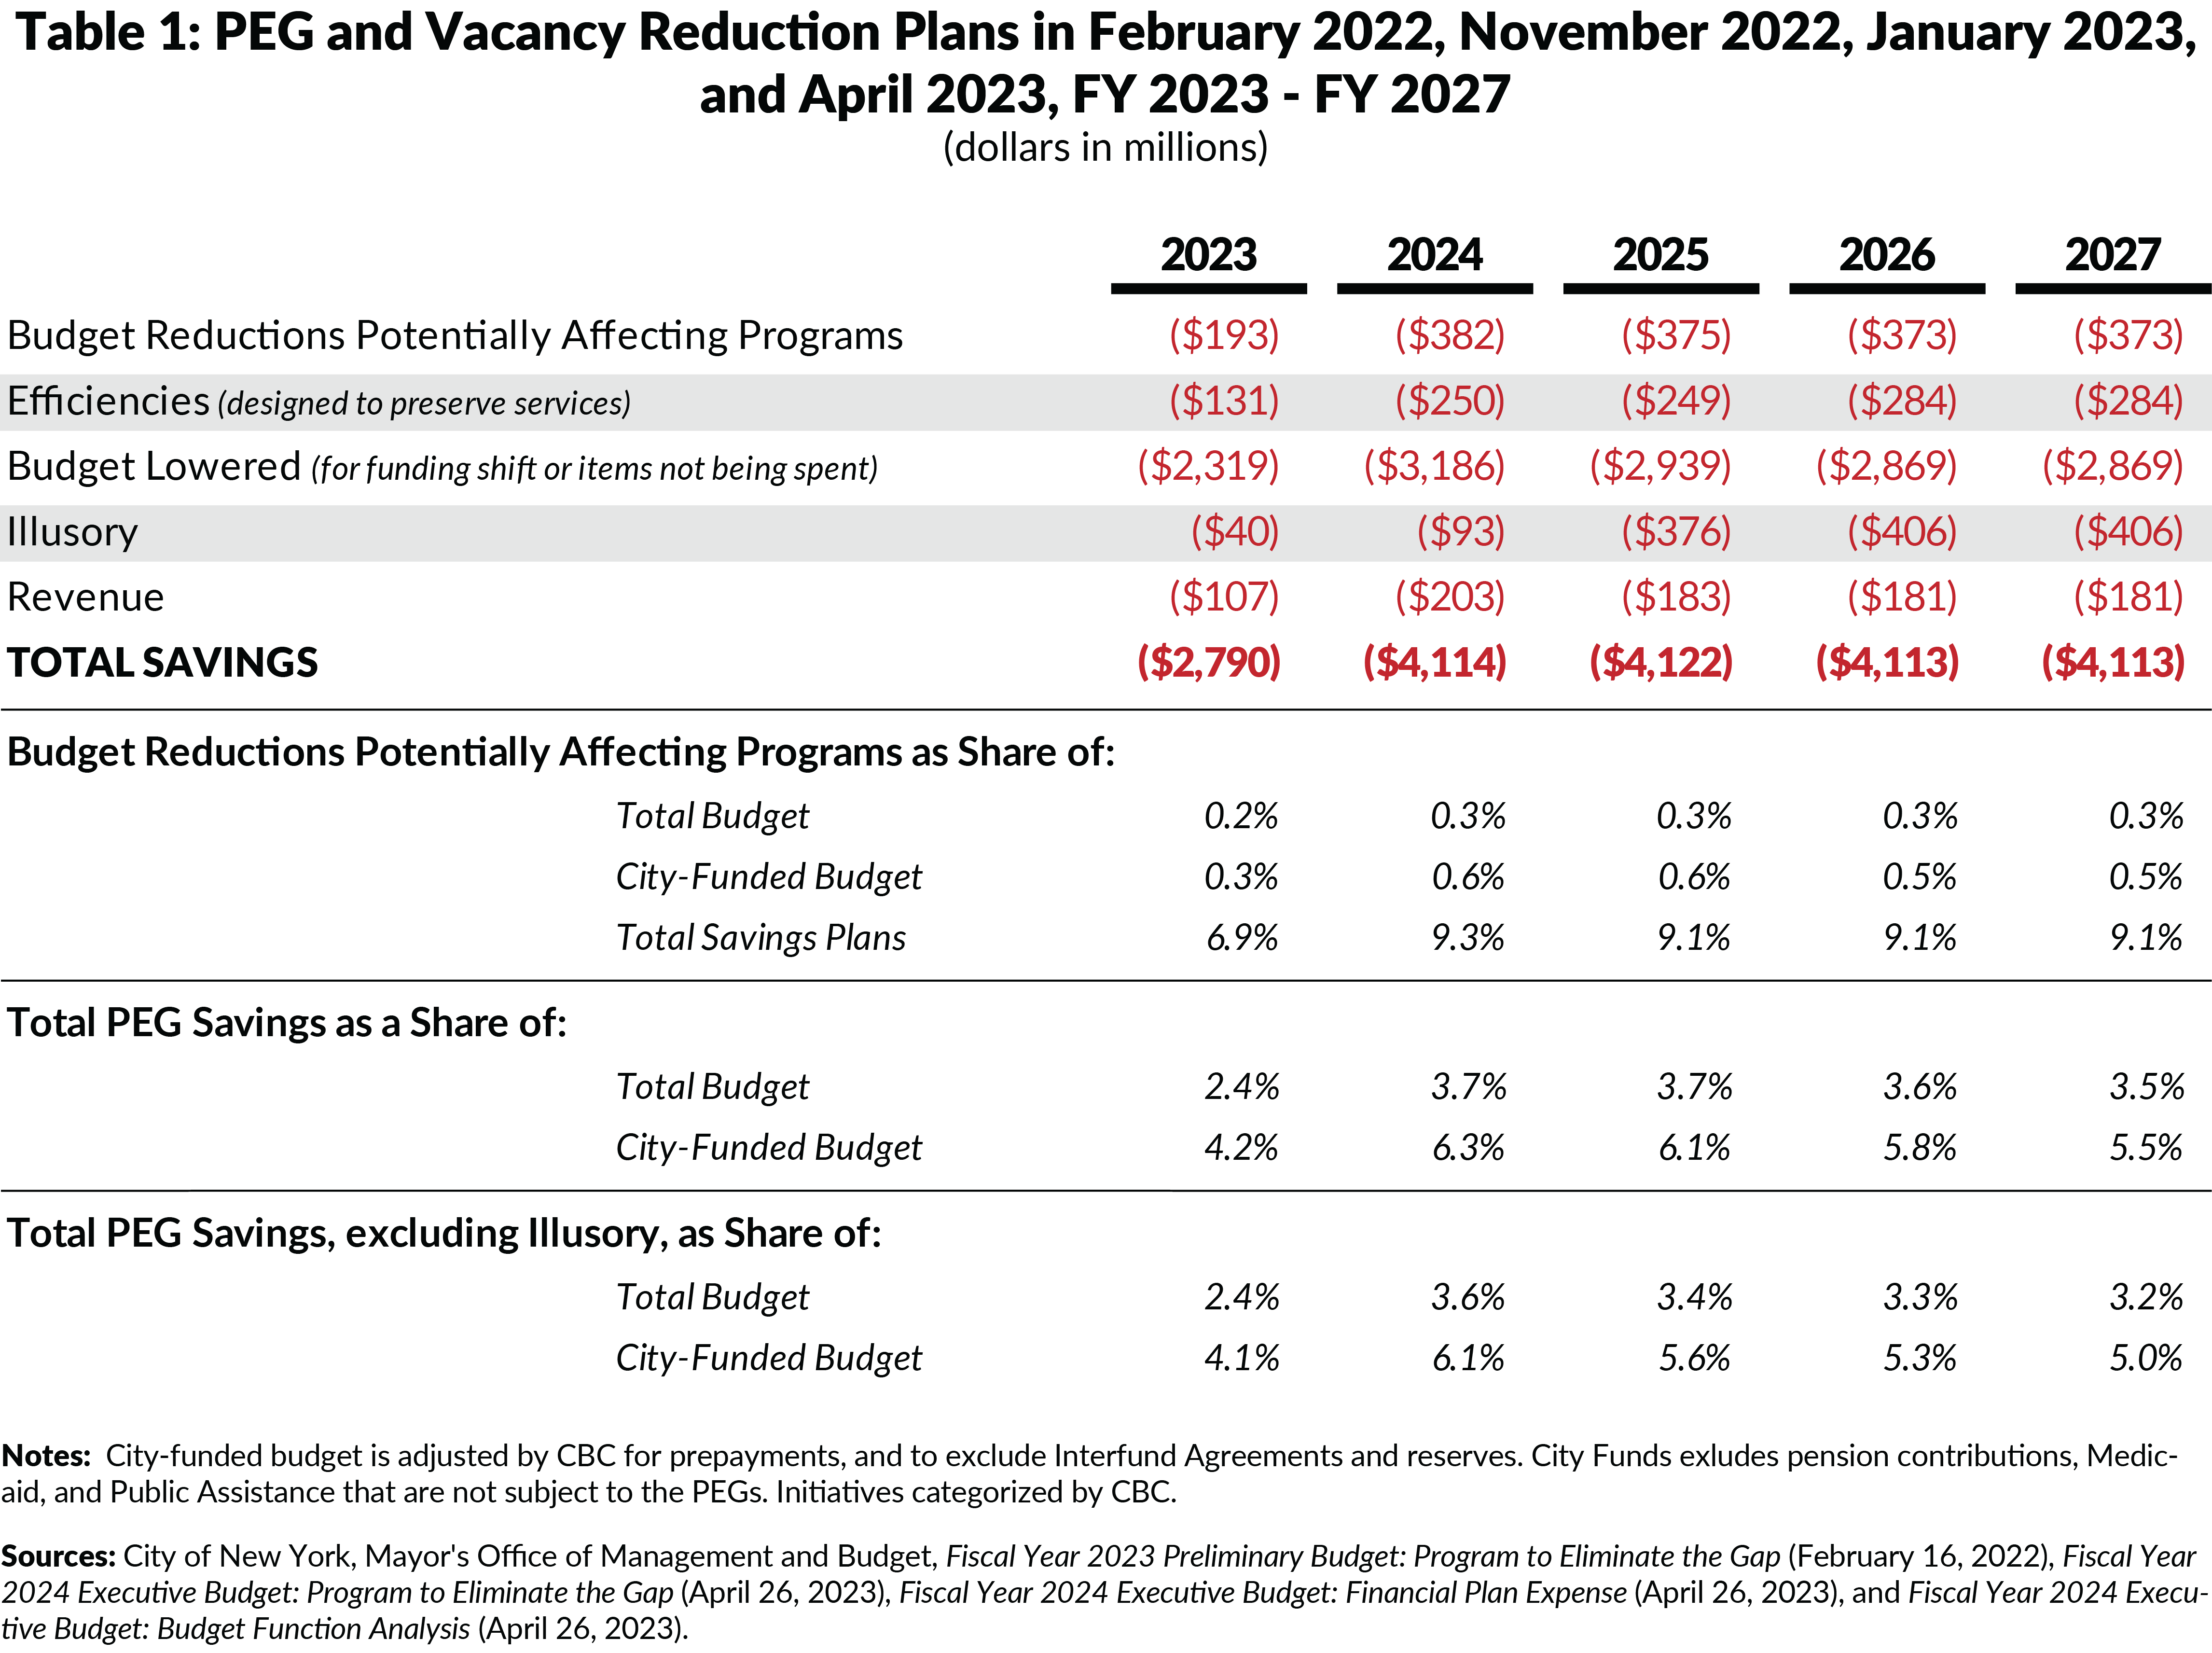 Table 1: Adams Administration PEG and Vacancy Reduction Plans in February 2022,November 2022, January 2023, and April 2023